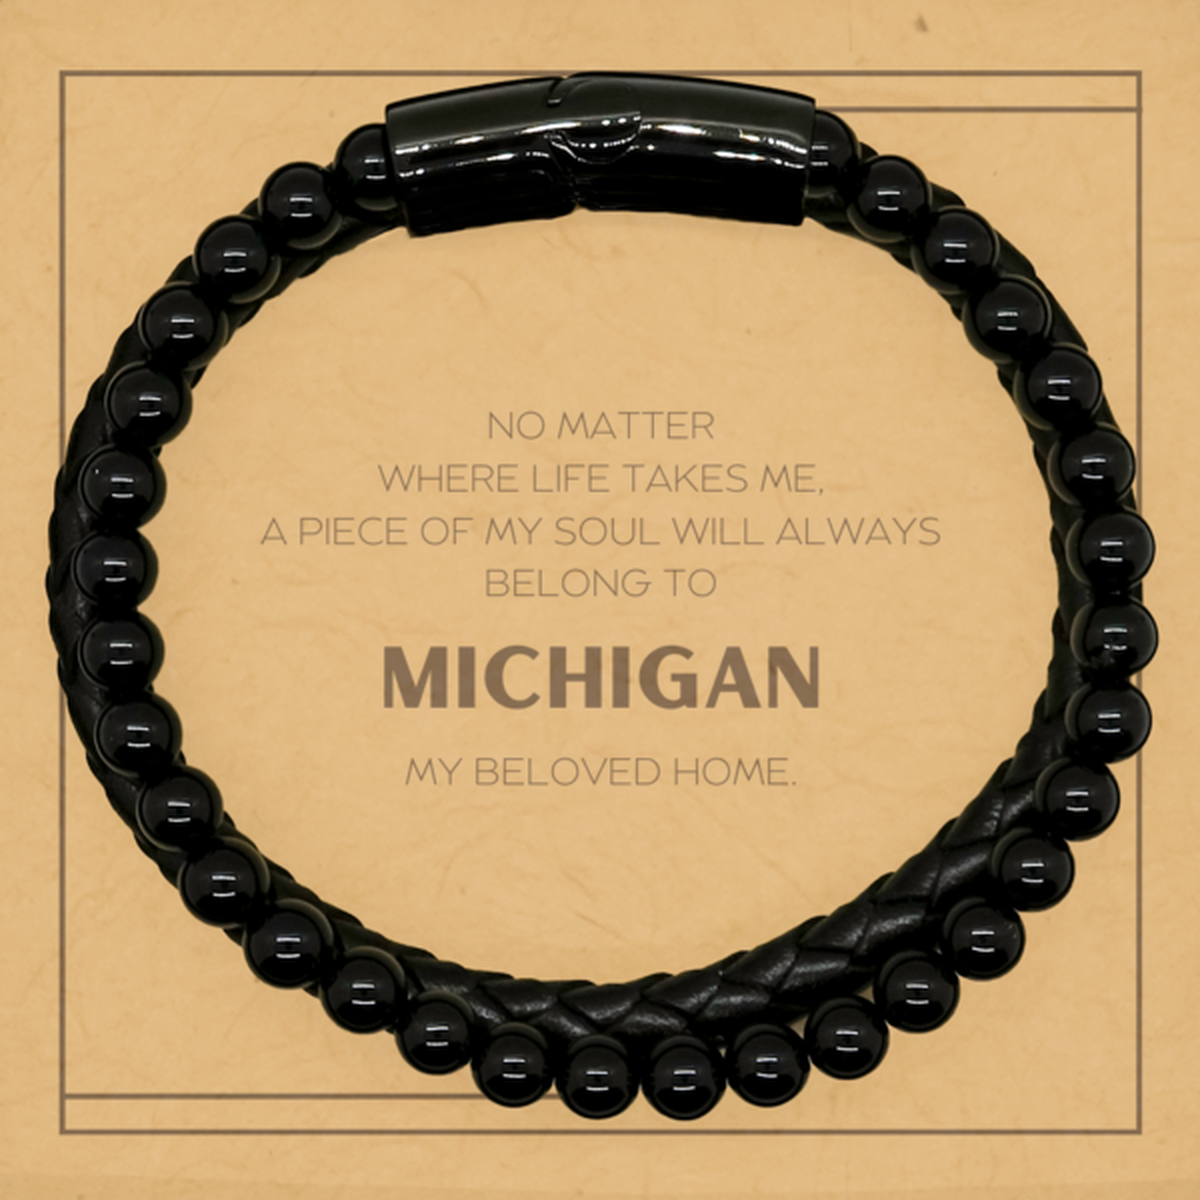 Love Michigan State Gifts, My soul will always belong to Michigan, Proud Stone Leather Bracelets, Birthday Unique Gifts For Michigan Men, Women, Friends